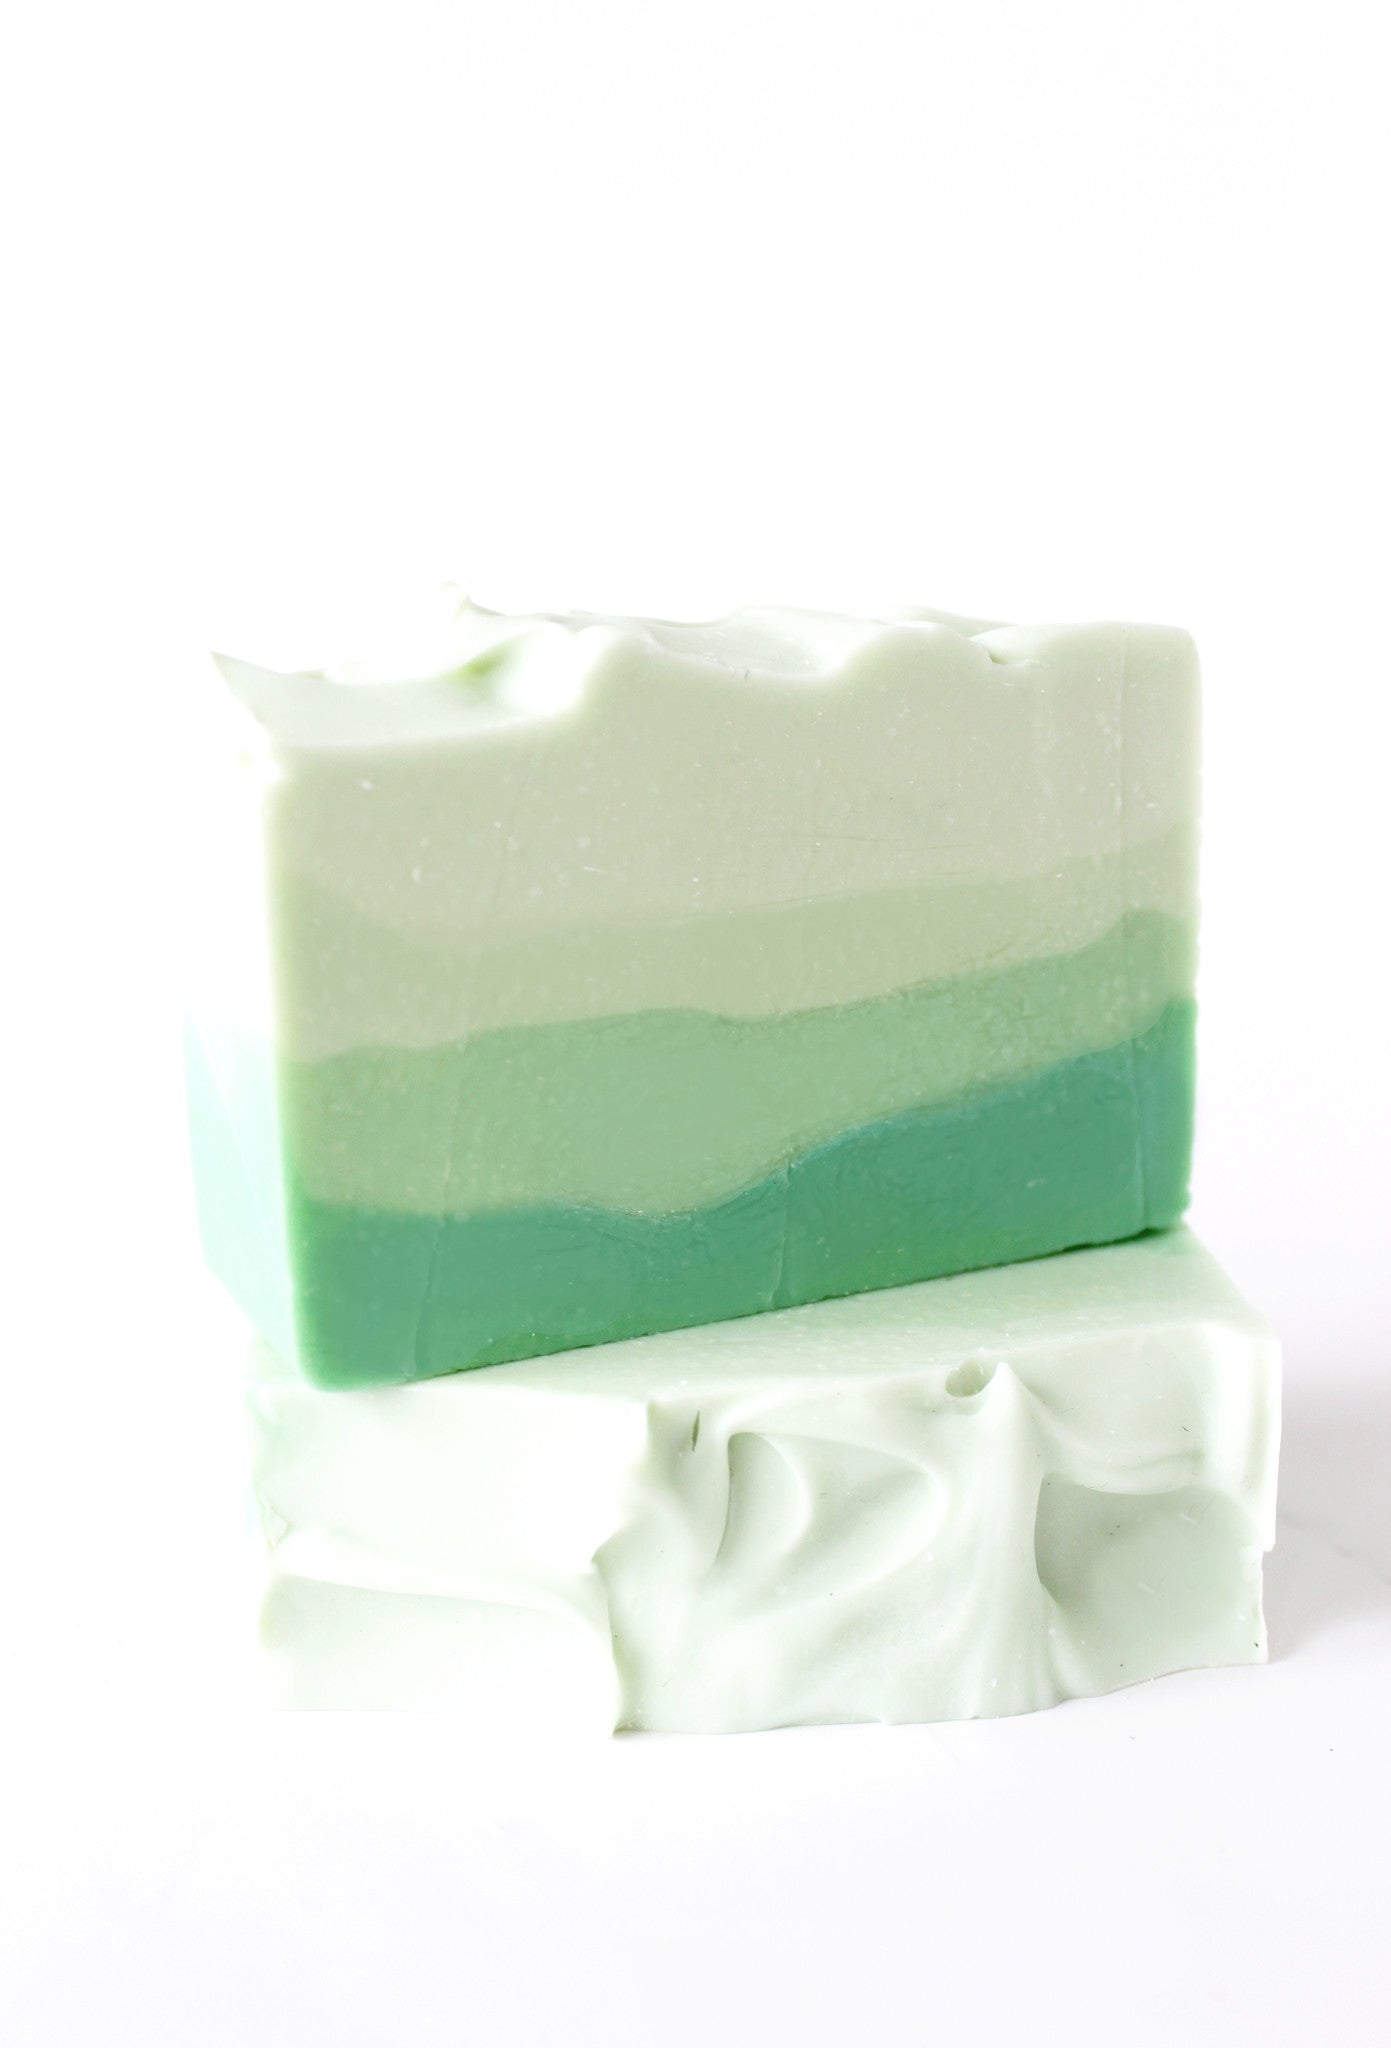 Clarity Handcrafted Soap Bar